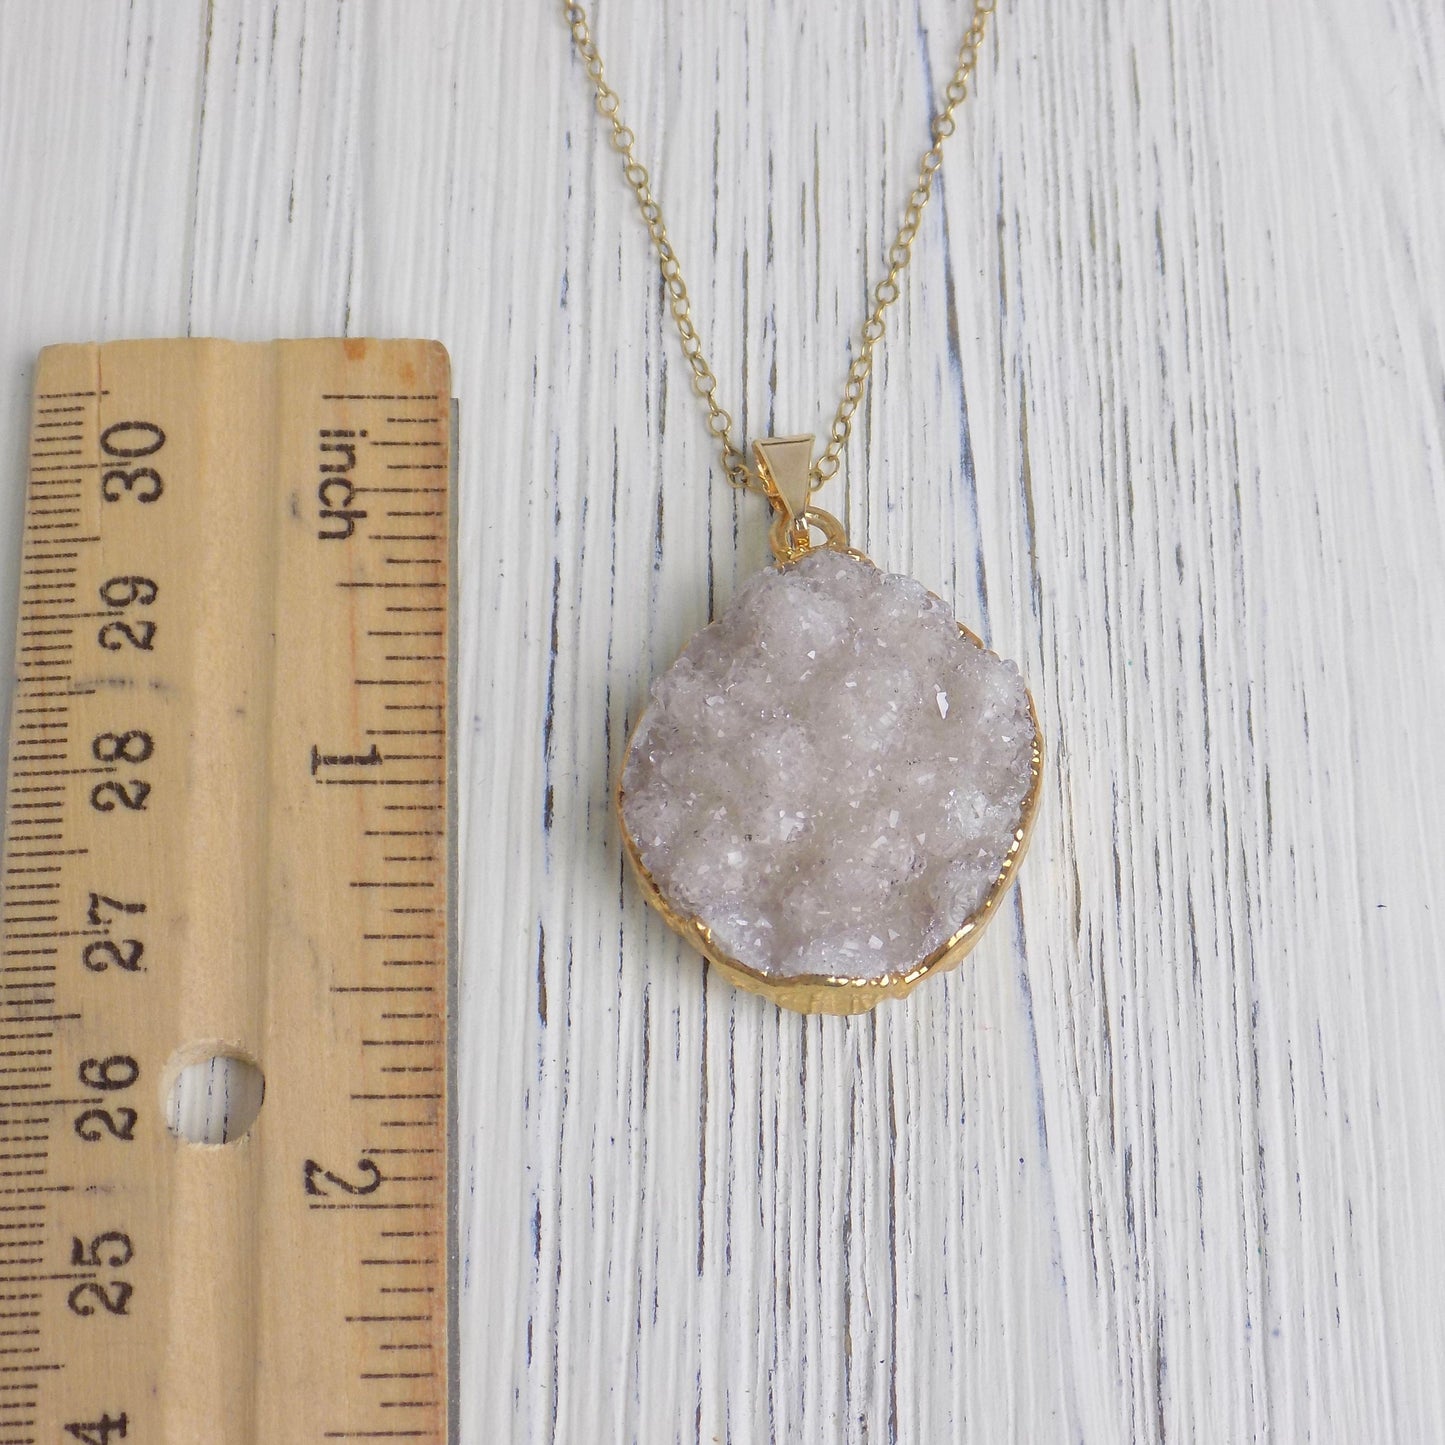 Valentines Day Gift, Light Gray Druzy Natural Gemstone Necklace on 14K Gold Filled Chain, G14-198